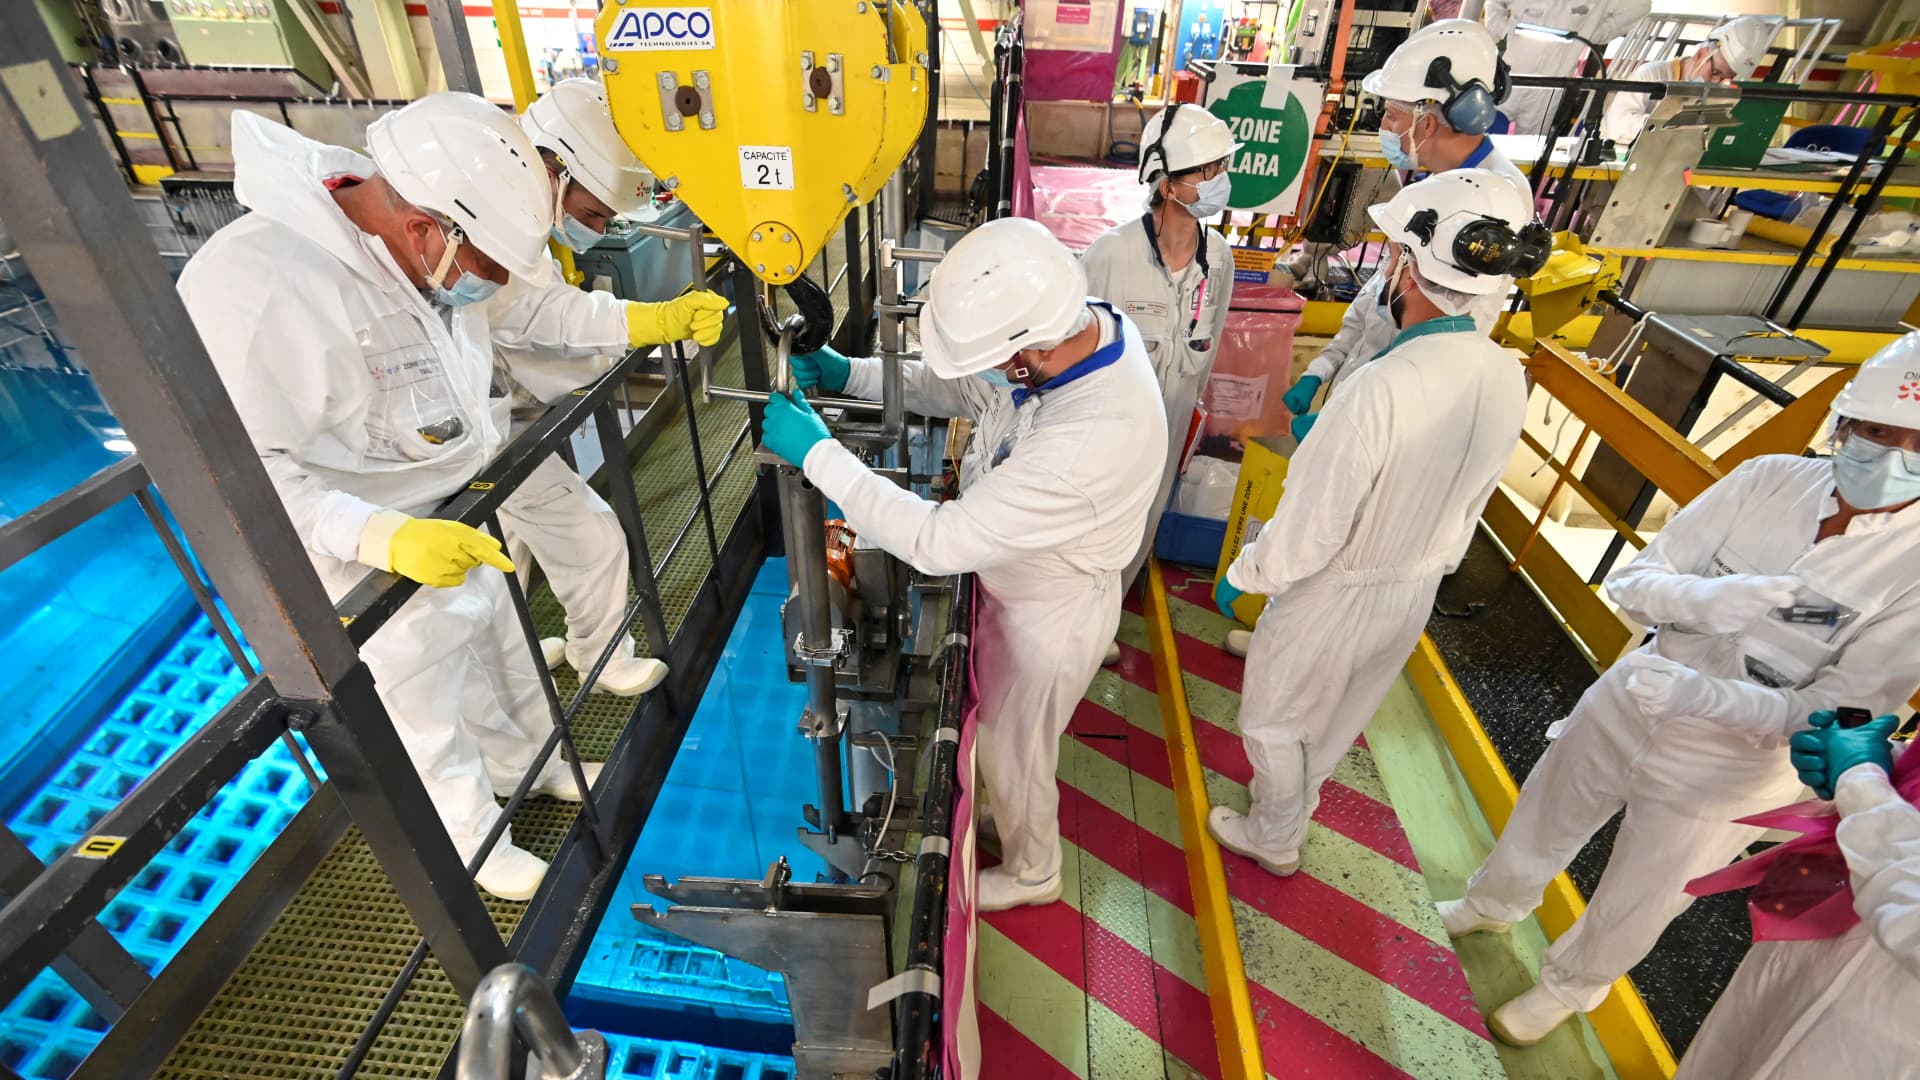 EDF employees remove a nuclear fuel bar from the storage poolat the Fessenheim nuclear power plant on June 21, 2021, in Fessenheim, eastern France.